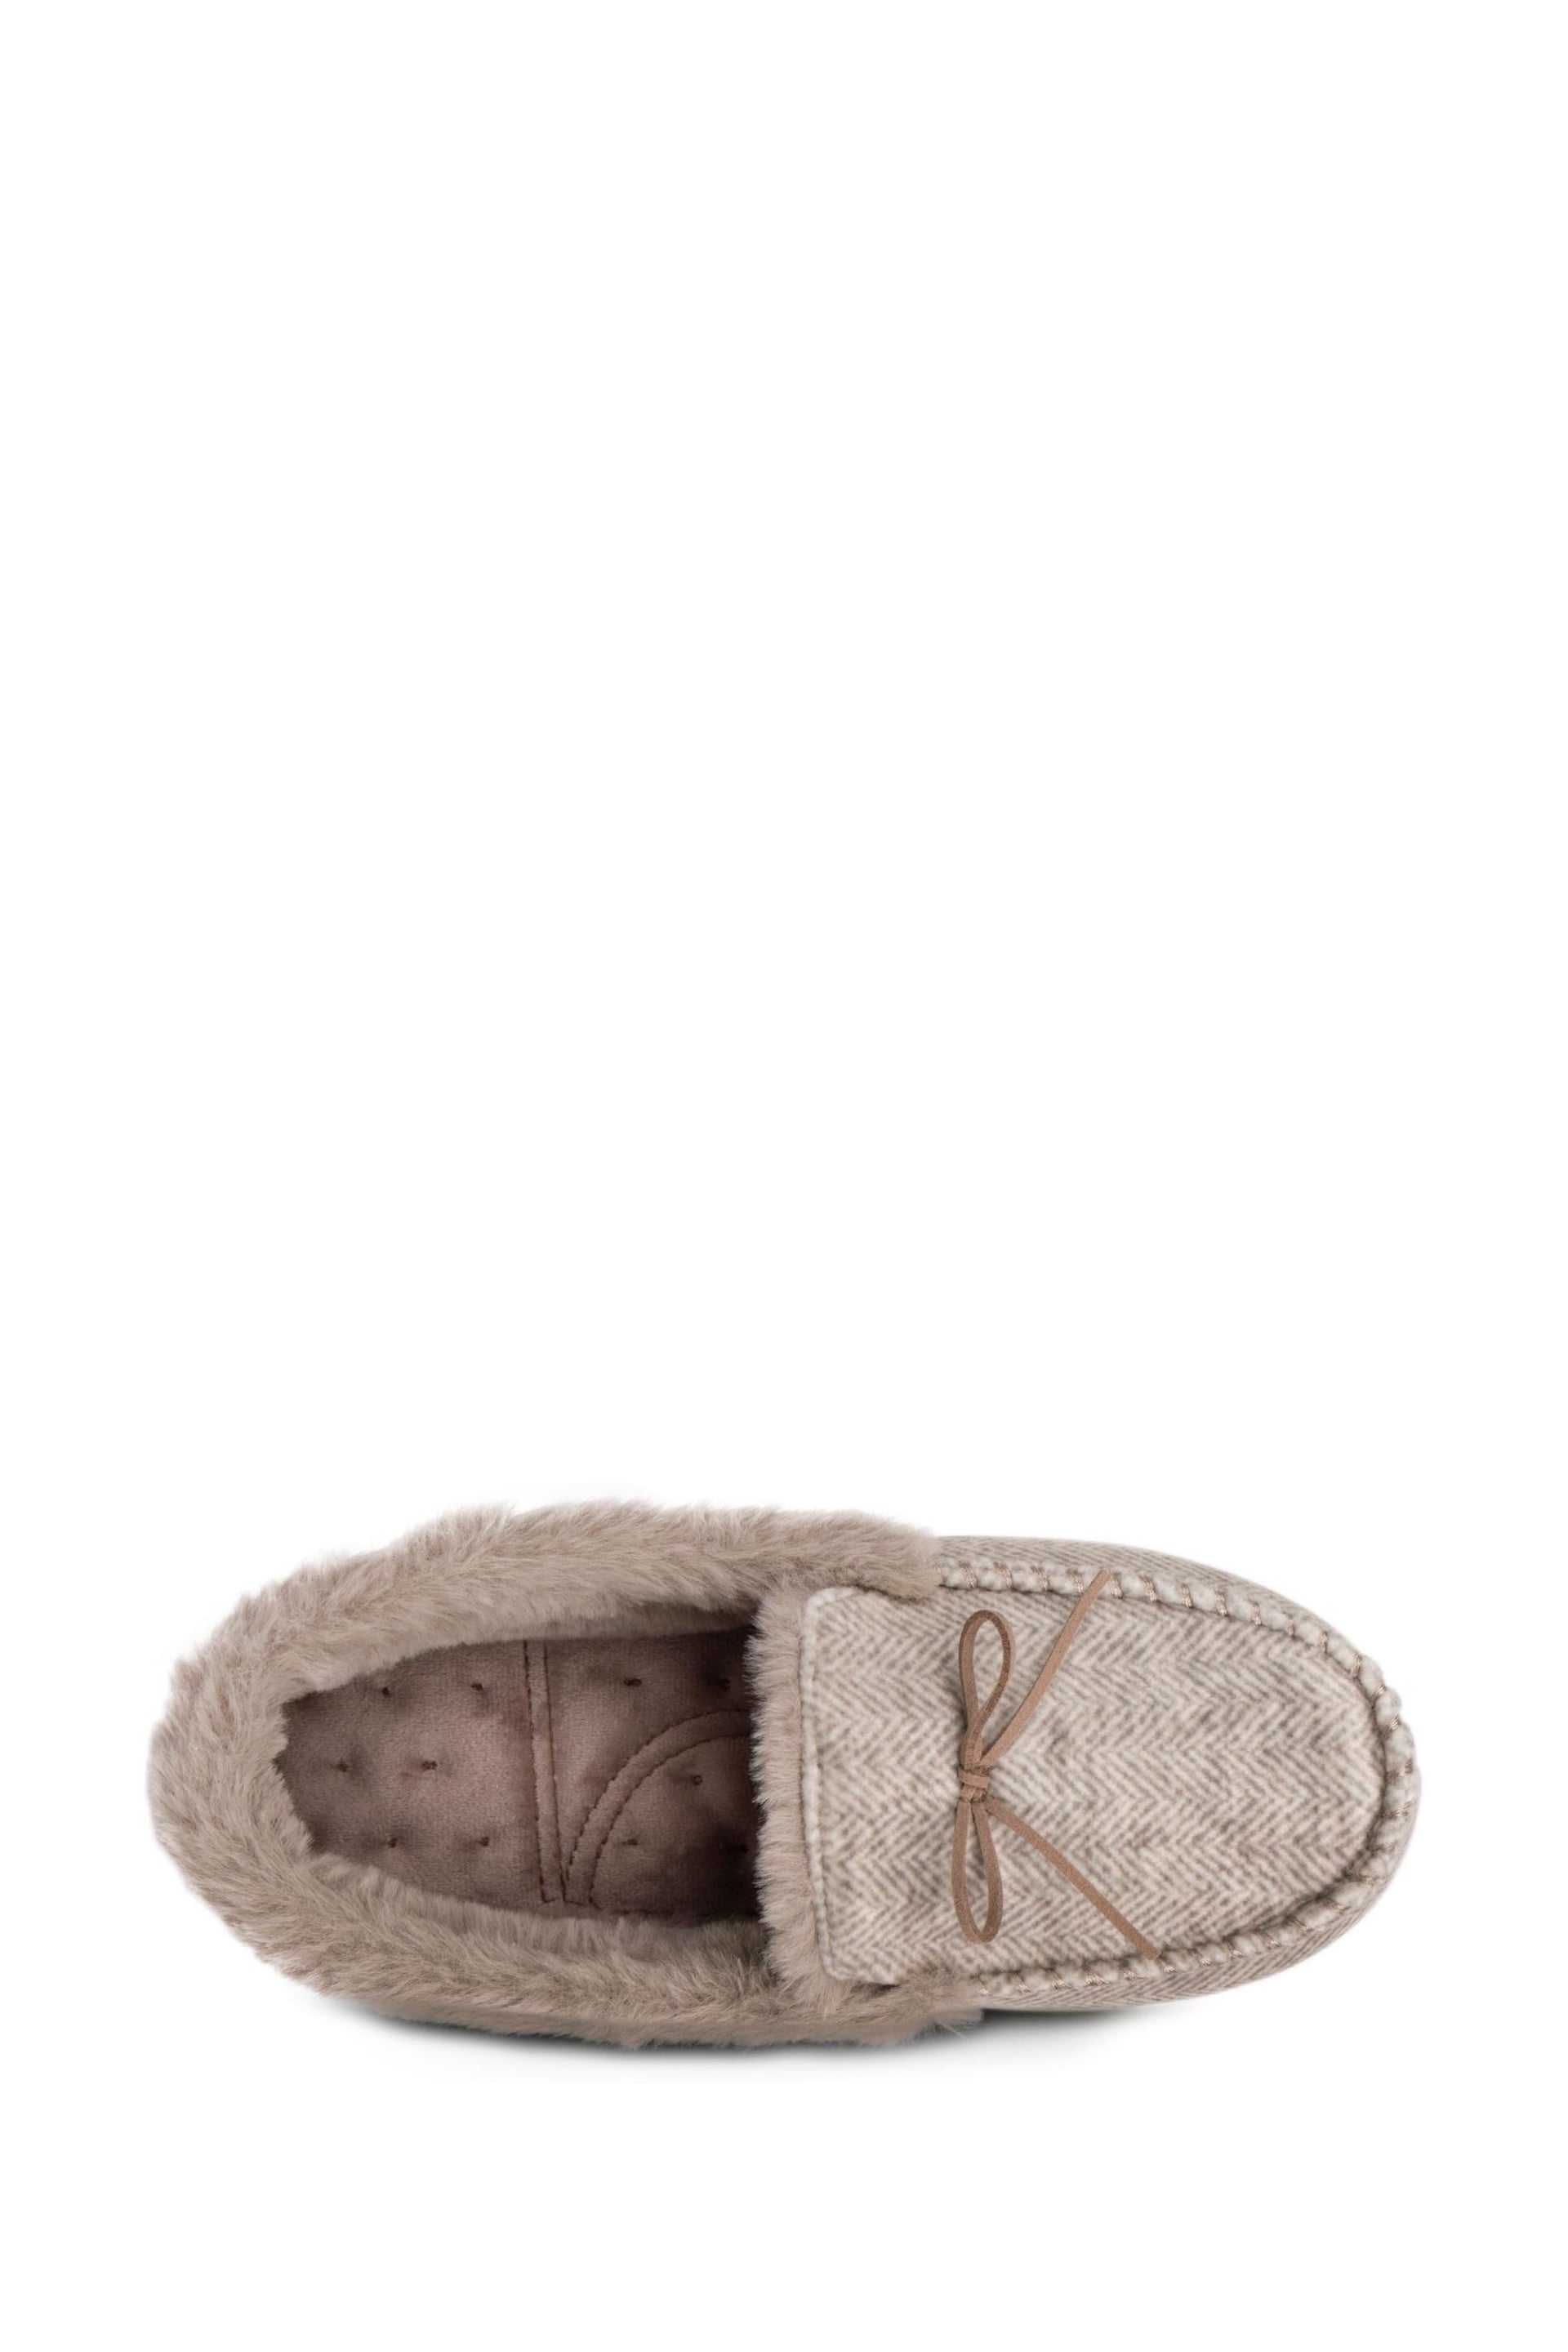 Totes Pink Ladies Herringbone Velour Moccasin With Faux Fur Cuff & Bow Detail - Image 4 of 5